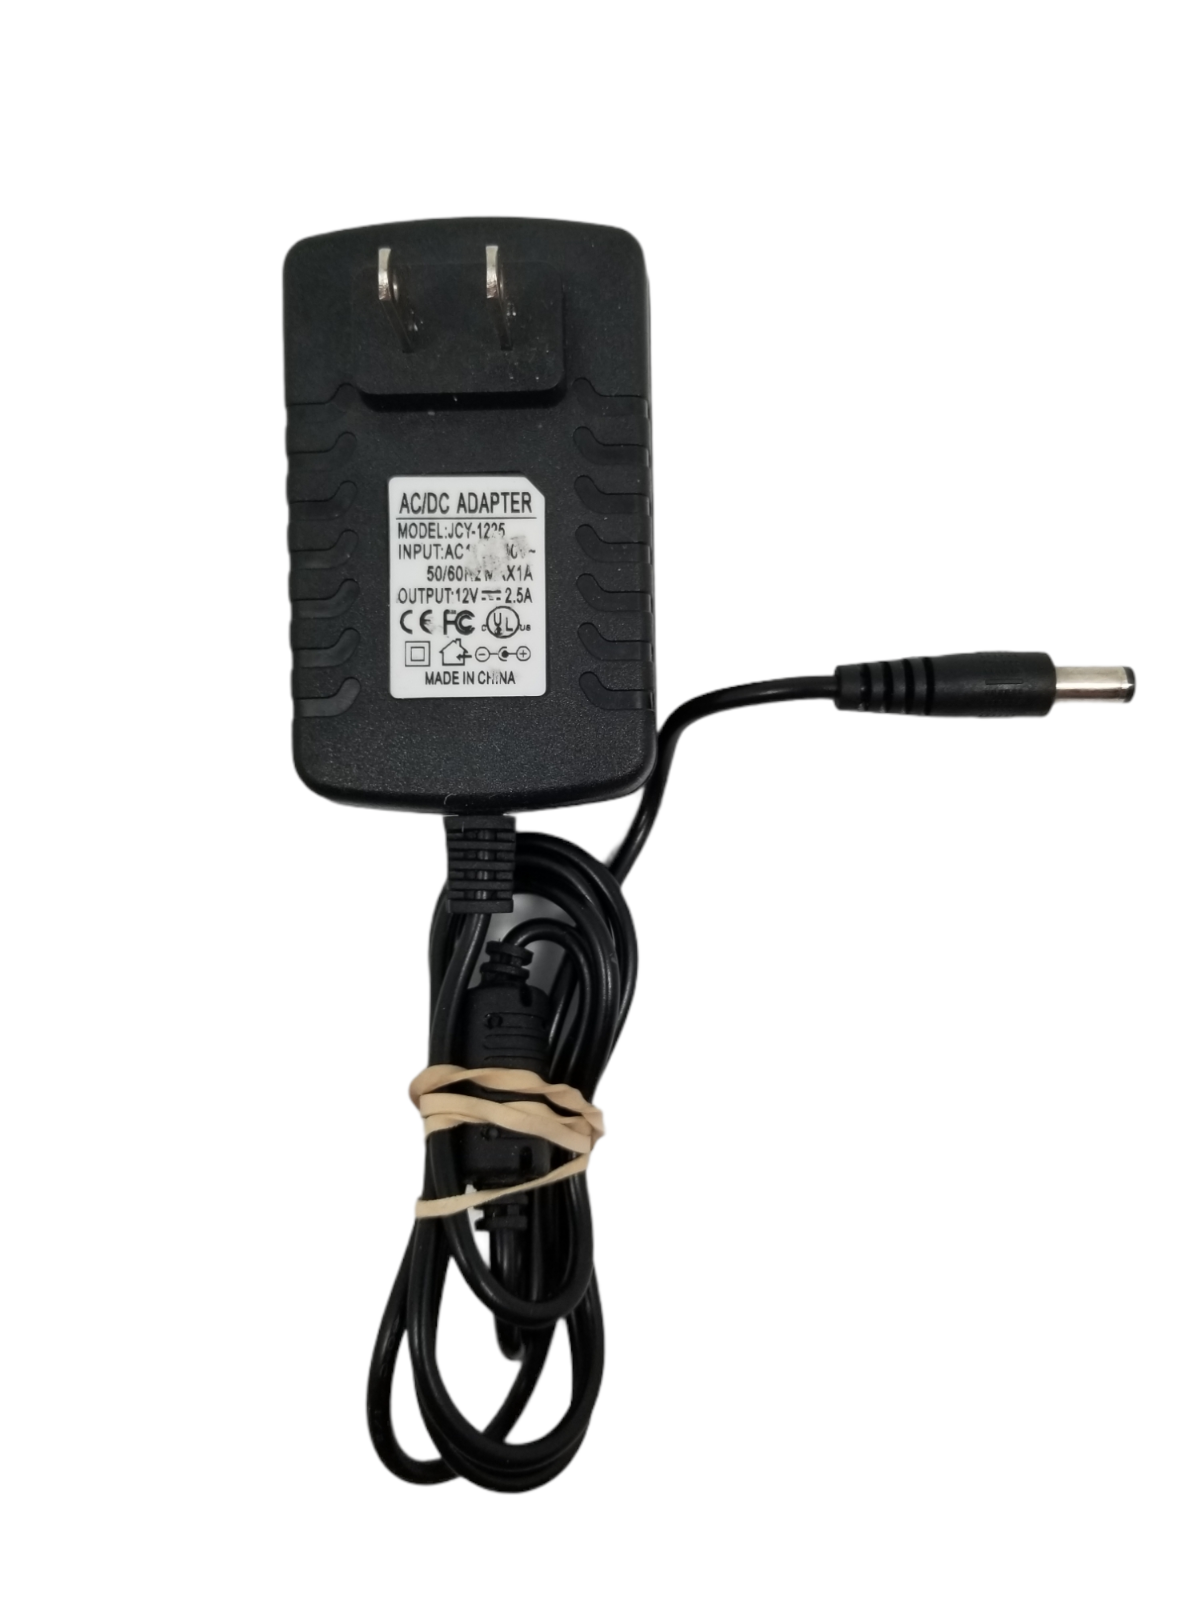 AC Adapter For Tascam PS-1225 PS-1225L Charger Power Supply PSU 12V 2.5A Mains Connection Split/Duplication: 1:2 Type